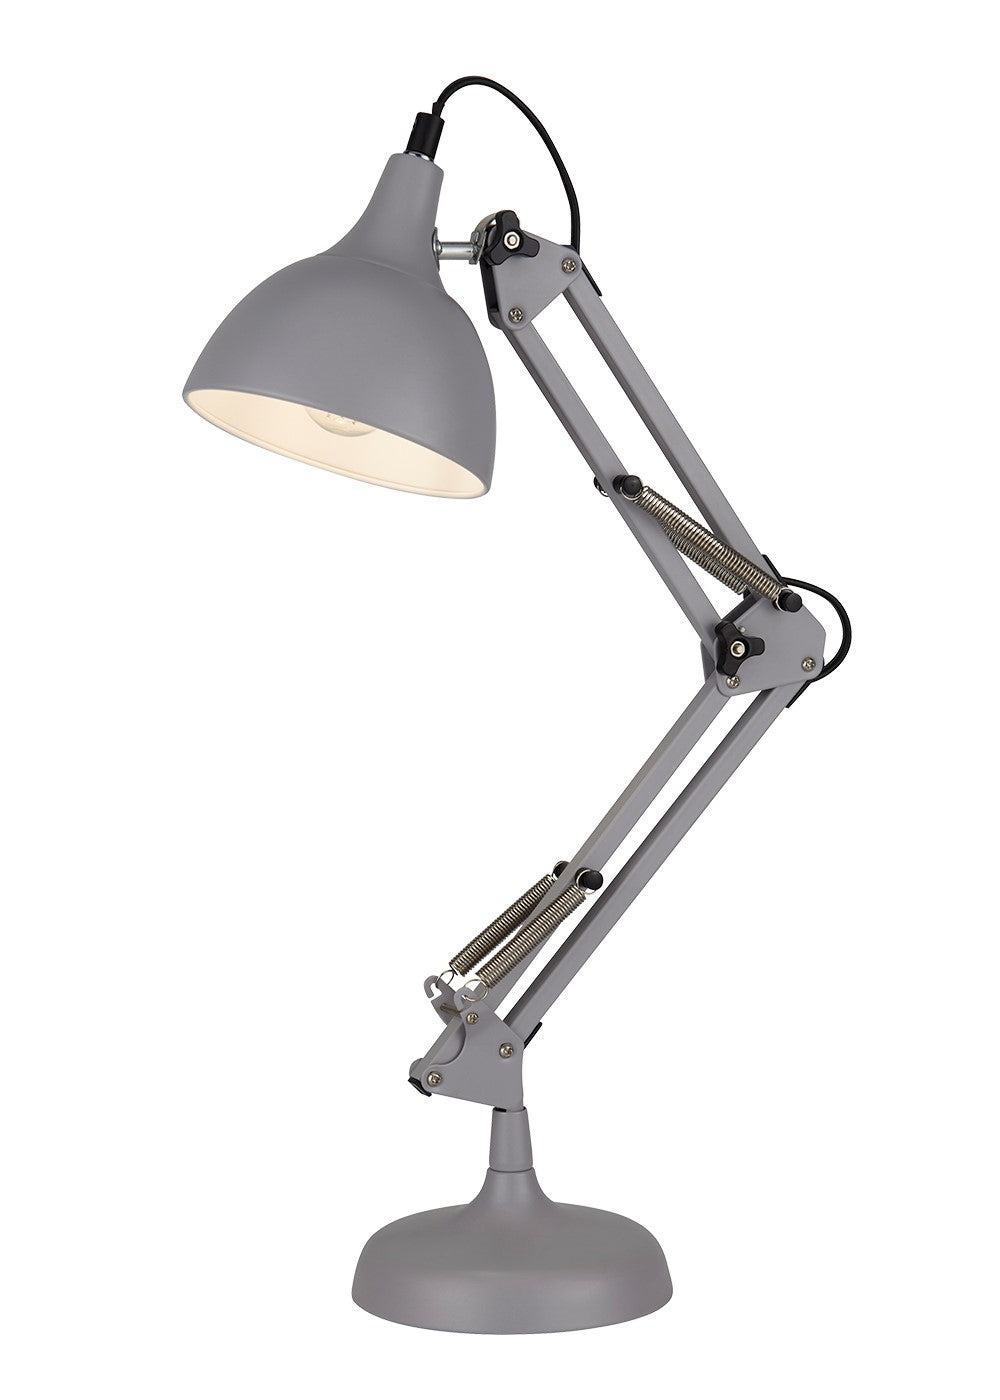 Our Ezra desk lamp is the perfect was to brighten your workspace or to simply add a stylish light solution to your room. It is modern take on the classic task lamp and comes in a soft grey finish. Adjustable to your desired positi